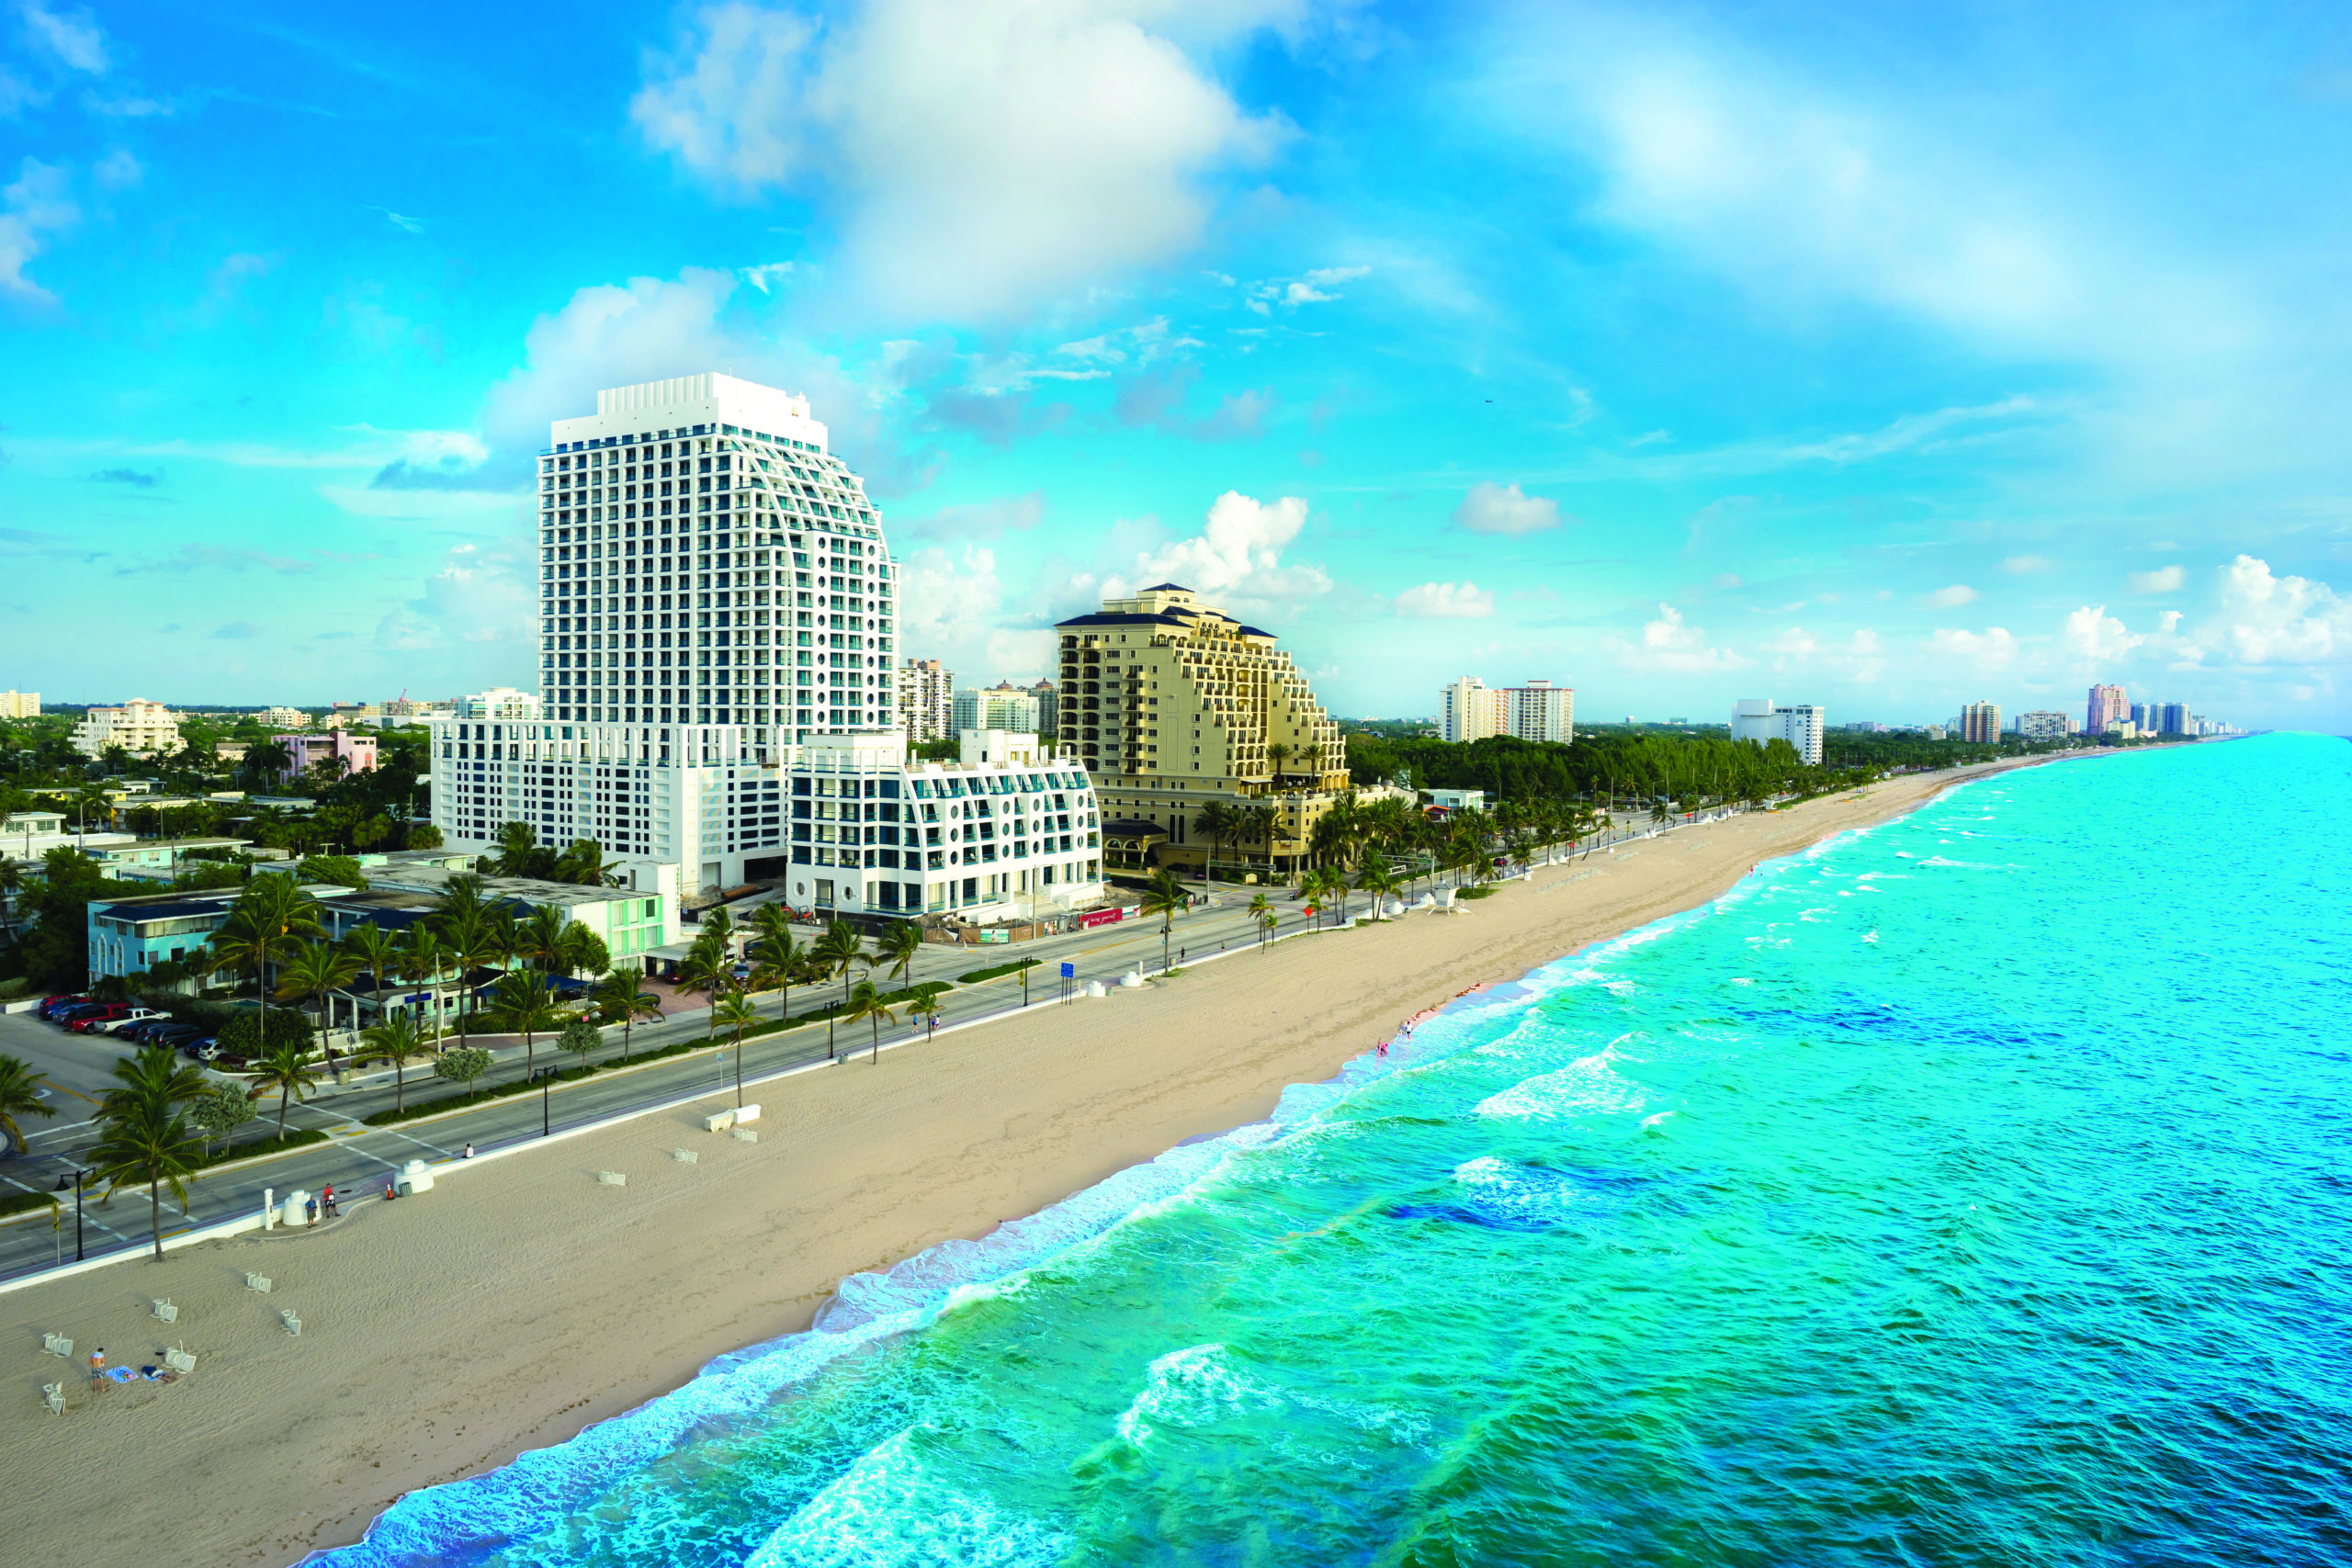 What to Look For and Avoid When Buying a Luxury Fort Lauderdale Condo